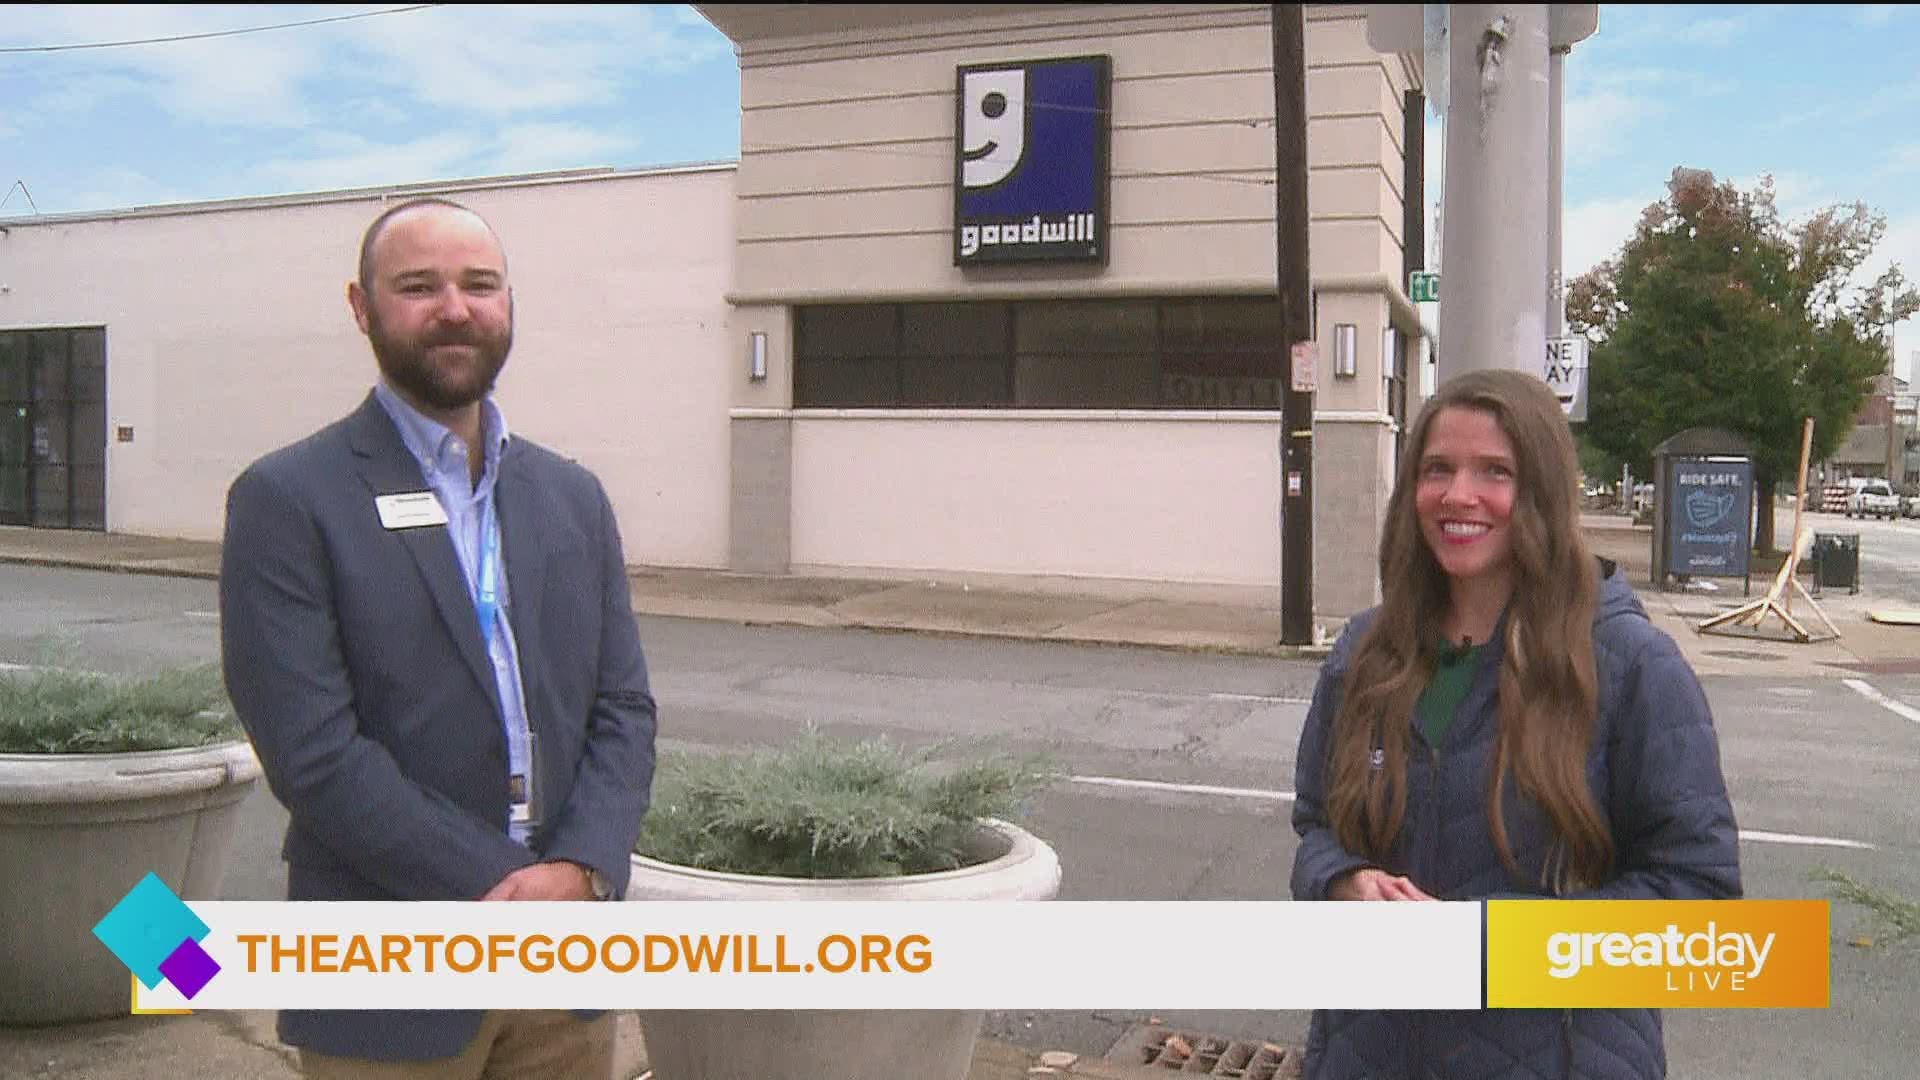 To learn more about the Goodwill Industries of Kentucky, visit GoodwillKY.org.